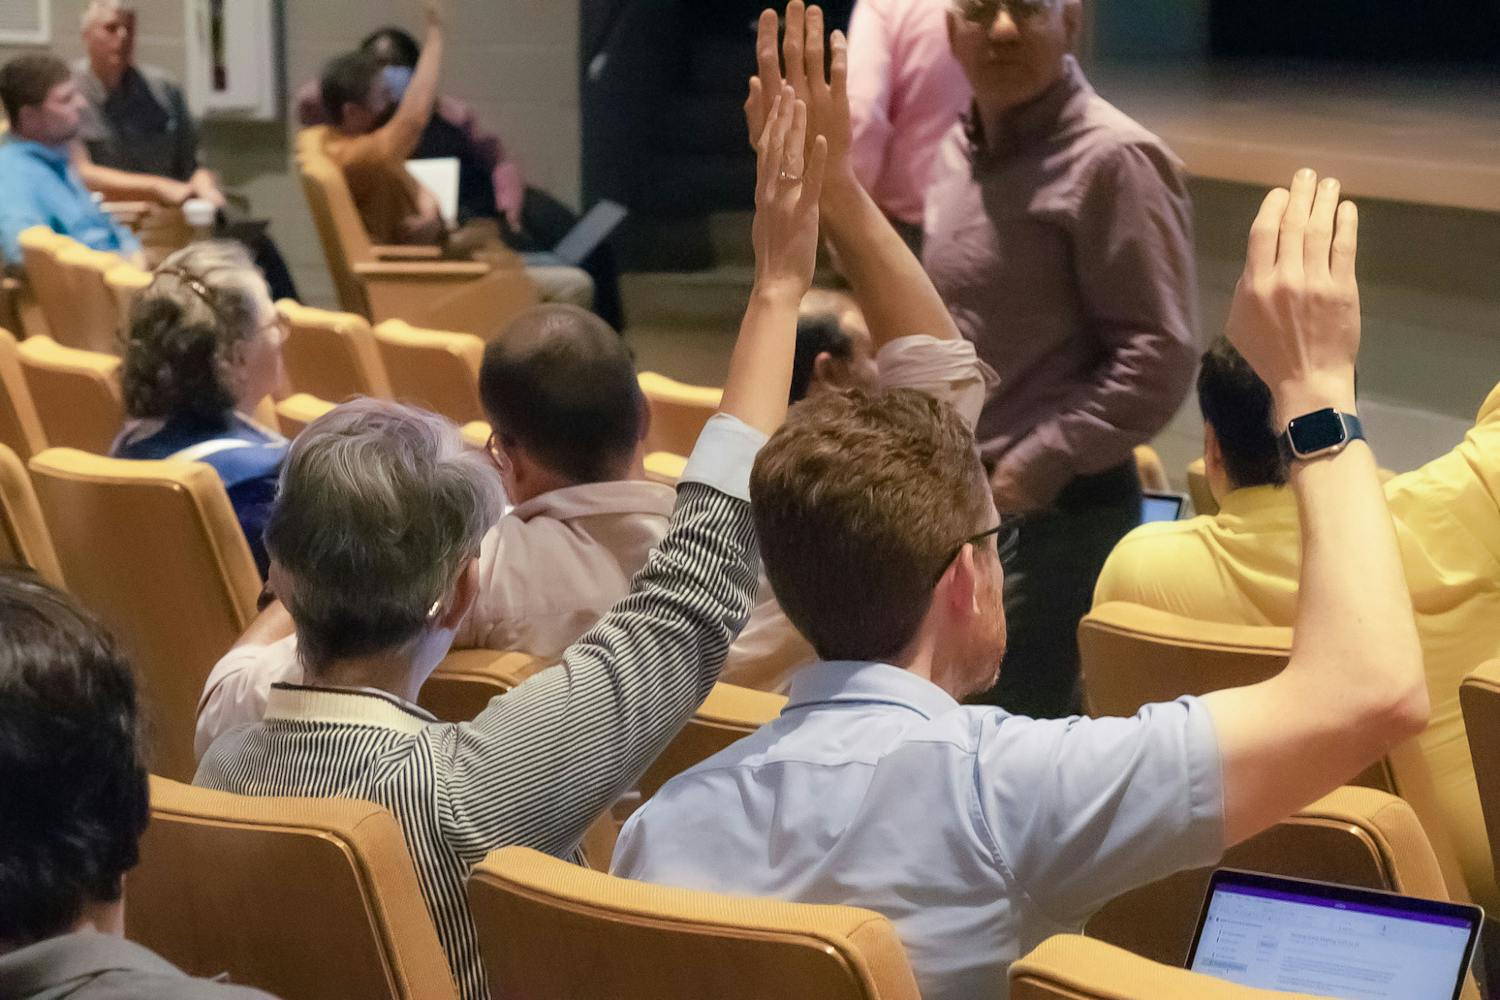 American Association of University Professors (AAUP) president Carol Harrison (left) and vice president Mark Minett (right) raise their hands to vote on a proposed amendment during the faculty senate meeting on April 19, 2023, in the Booker T. Washington Auditorium. Harrison spoke on the necessity for universities to prioritize the values they hold students and faculty to.